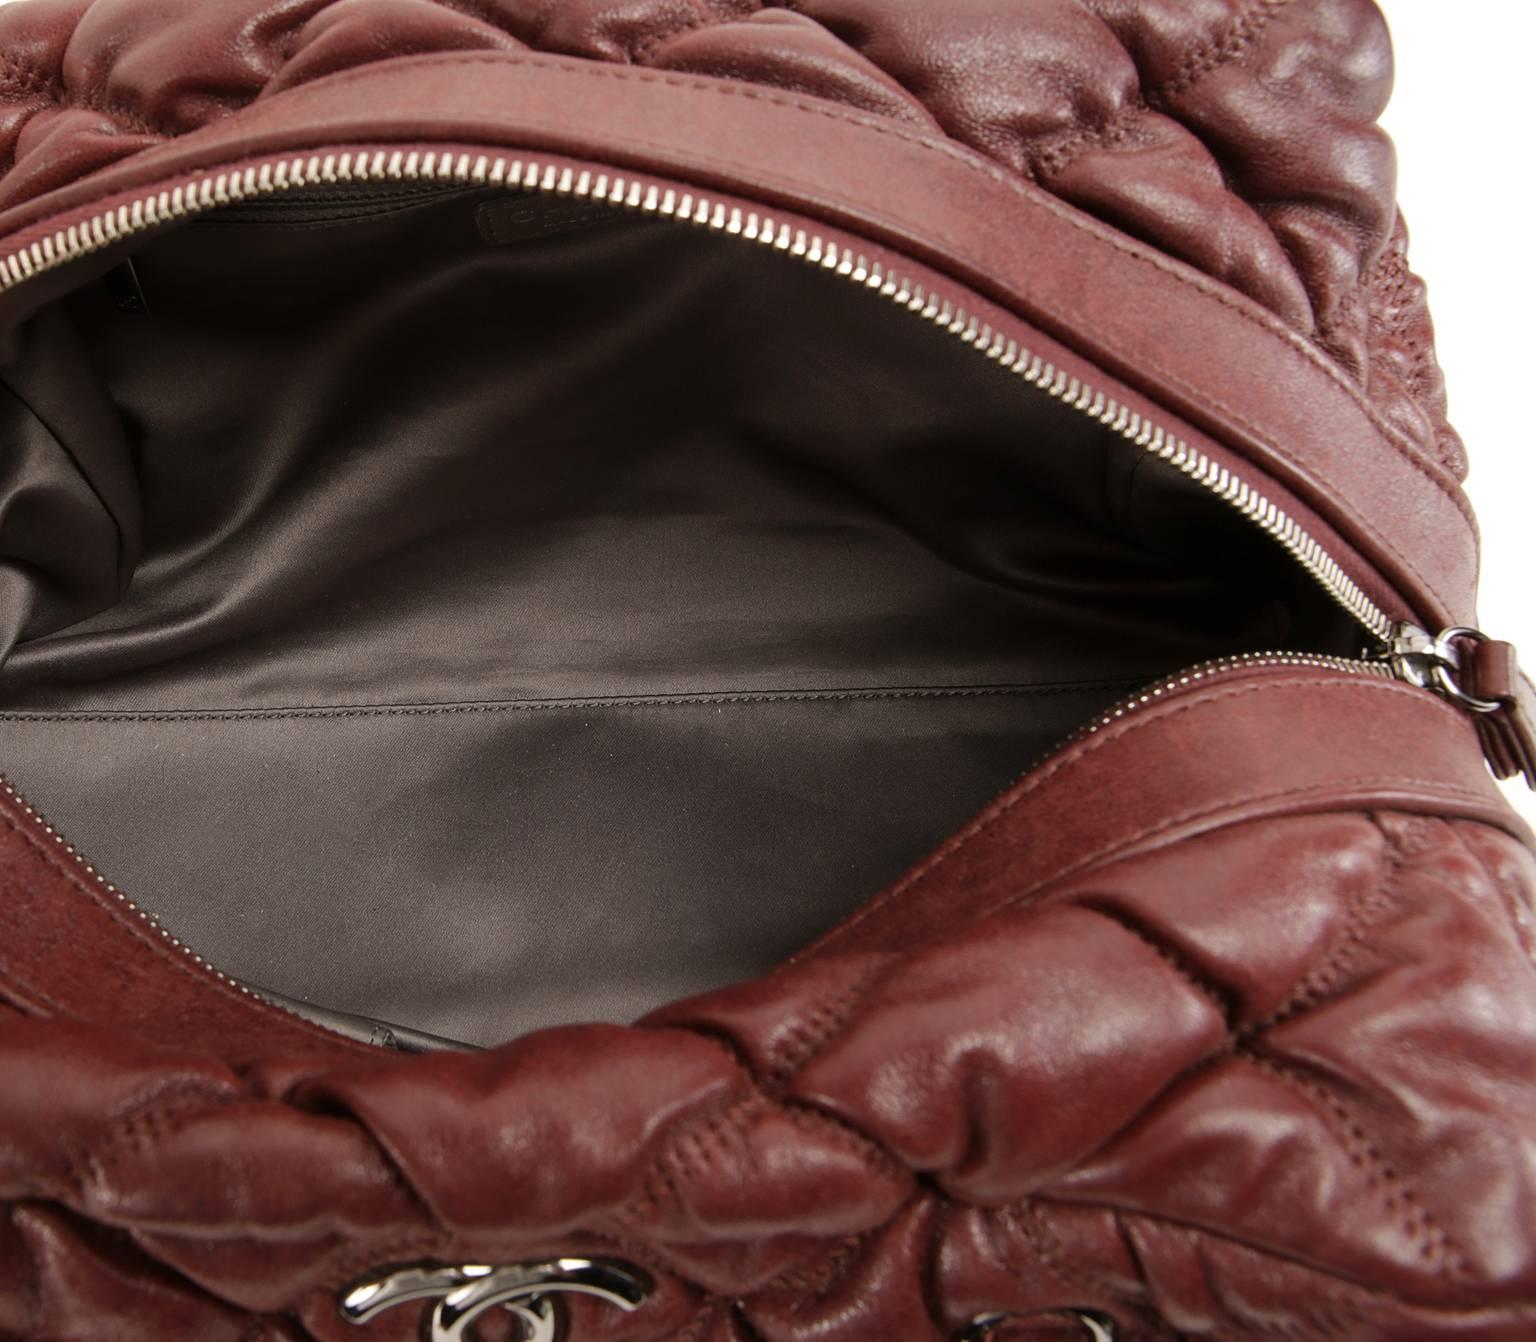 Women's Chanel Dark Red Leather Bubble Quilt Bag For Sale